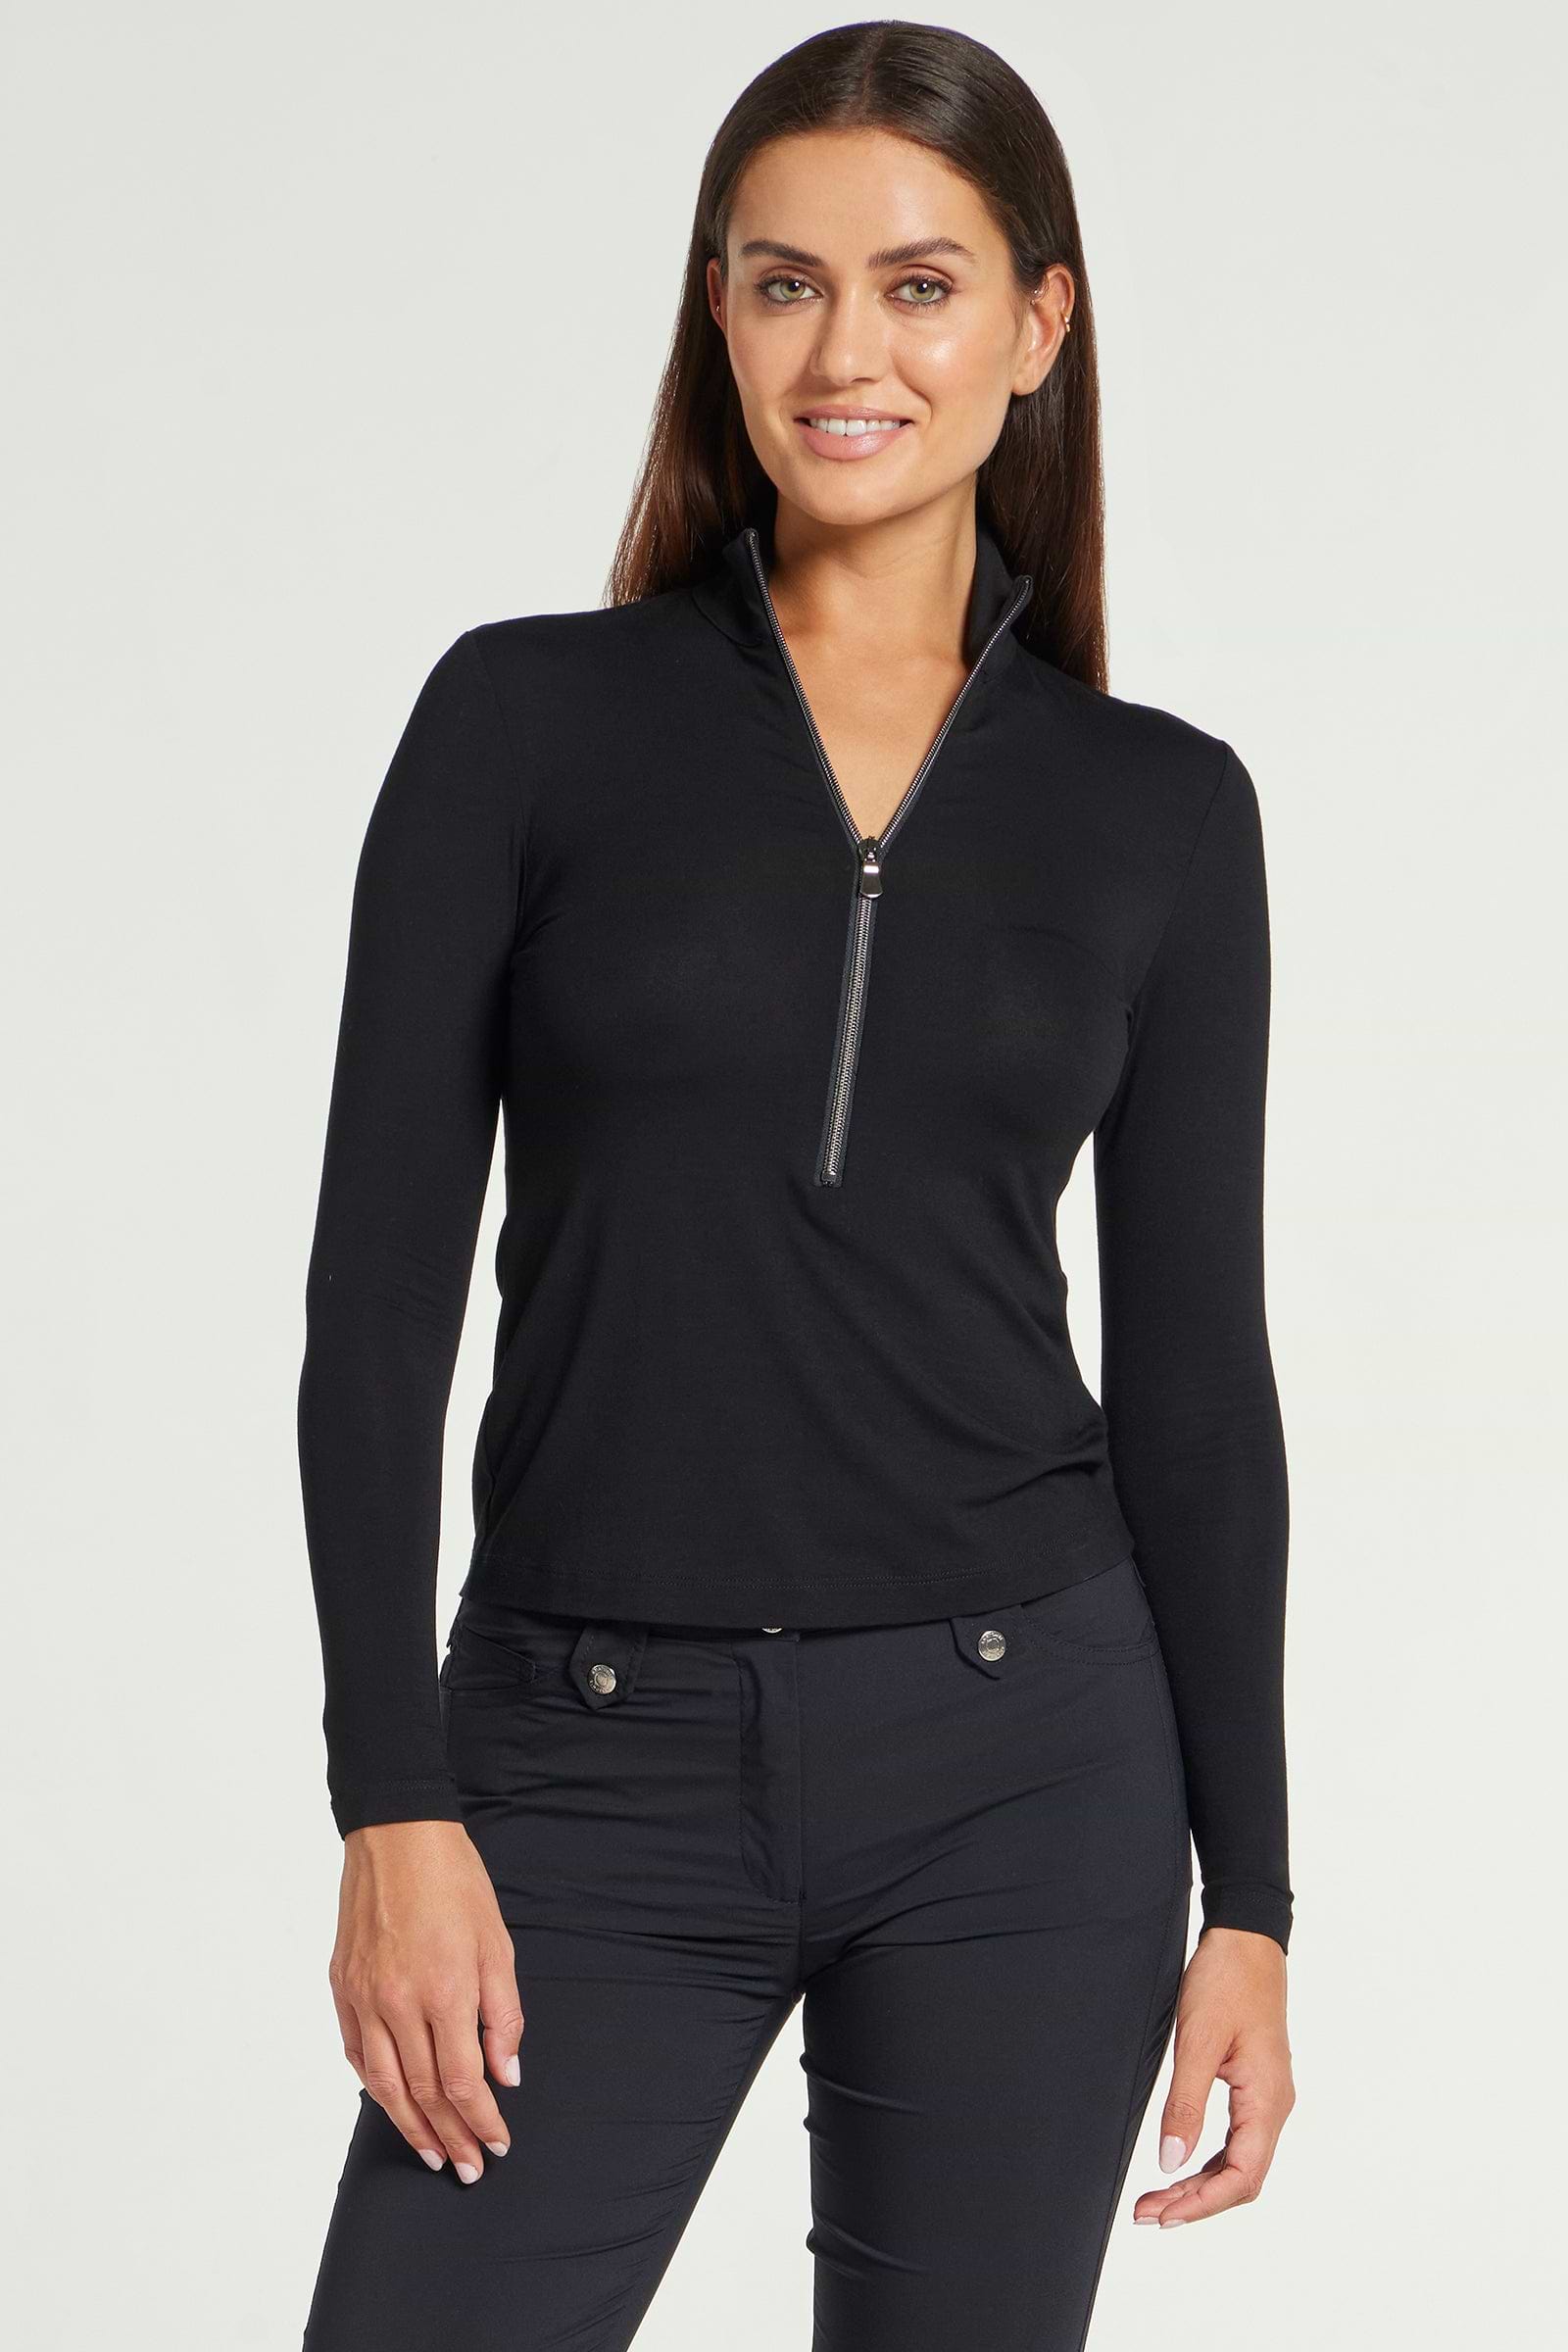 The Best Travel Top. Woman Showing the Front Profile of a Stacey Top in Black.